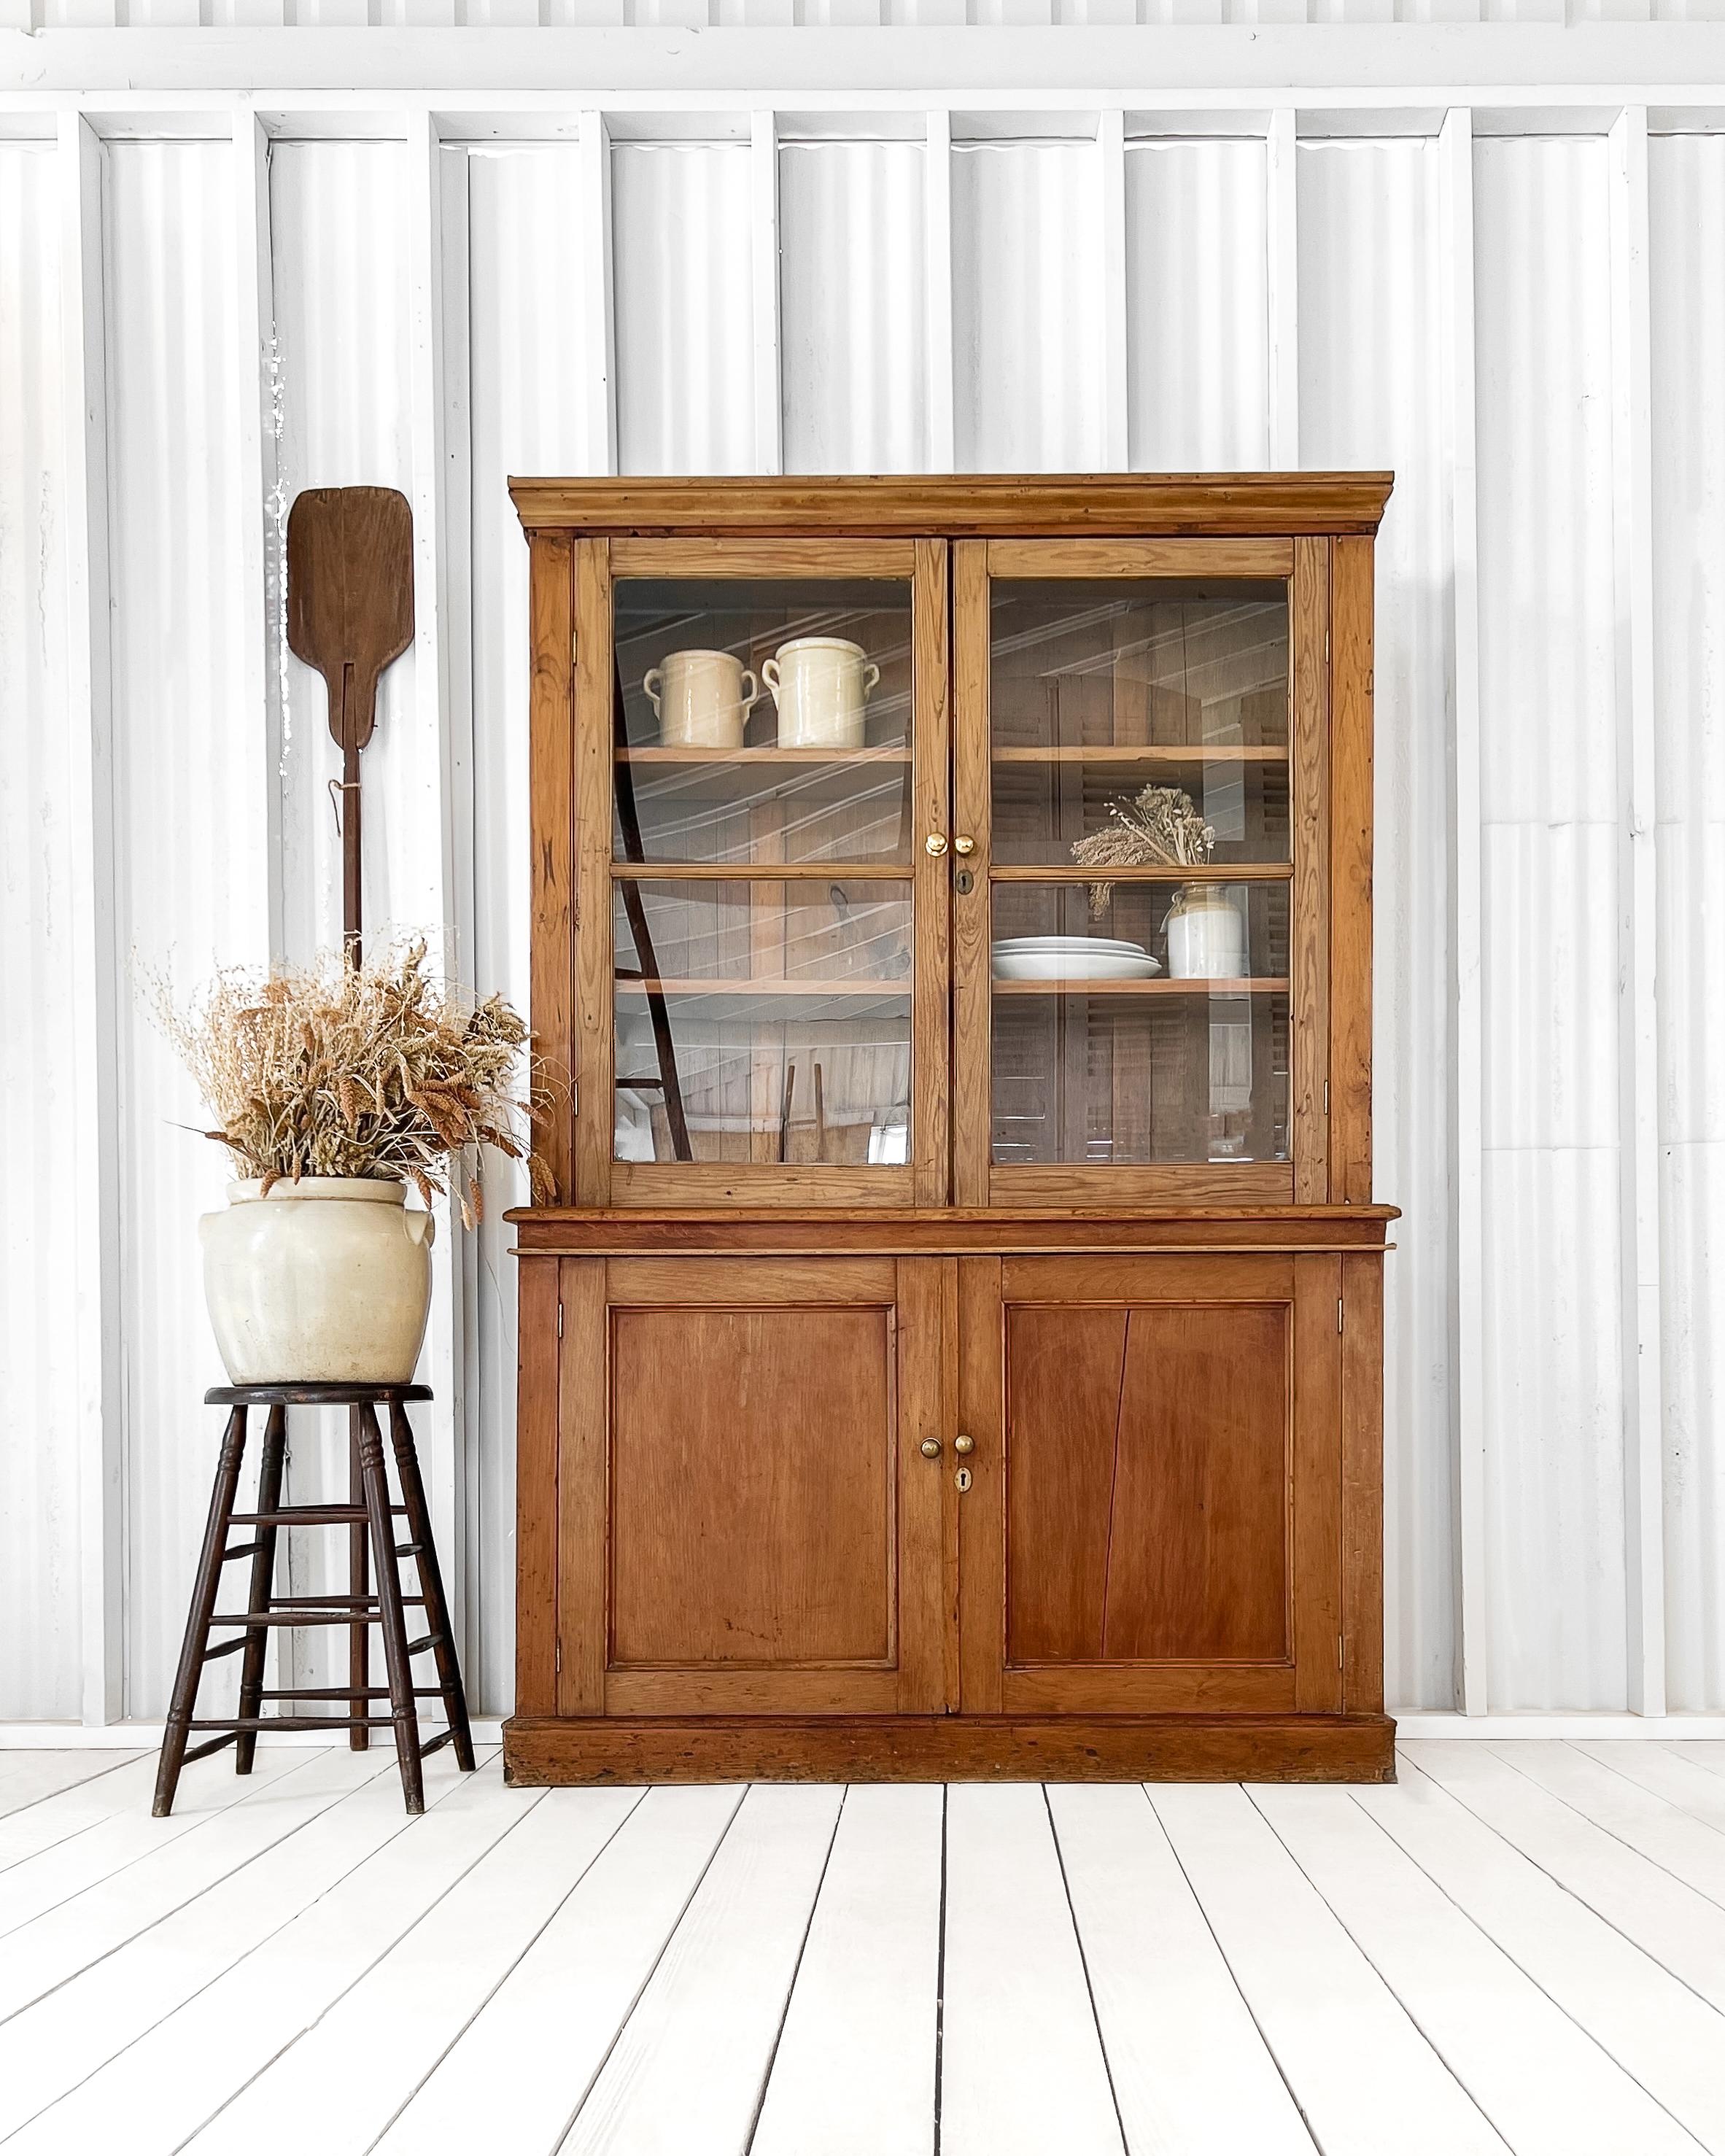 Traditional step-back hutch having handsome, straightforward features. Found in England, circa 1850, and handcrafted from solid English pine. Two adjustable shelves sit behind the glass doors of the upper, while a single shelf is enclosed behind